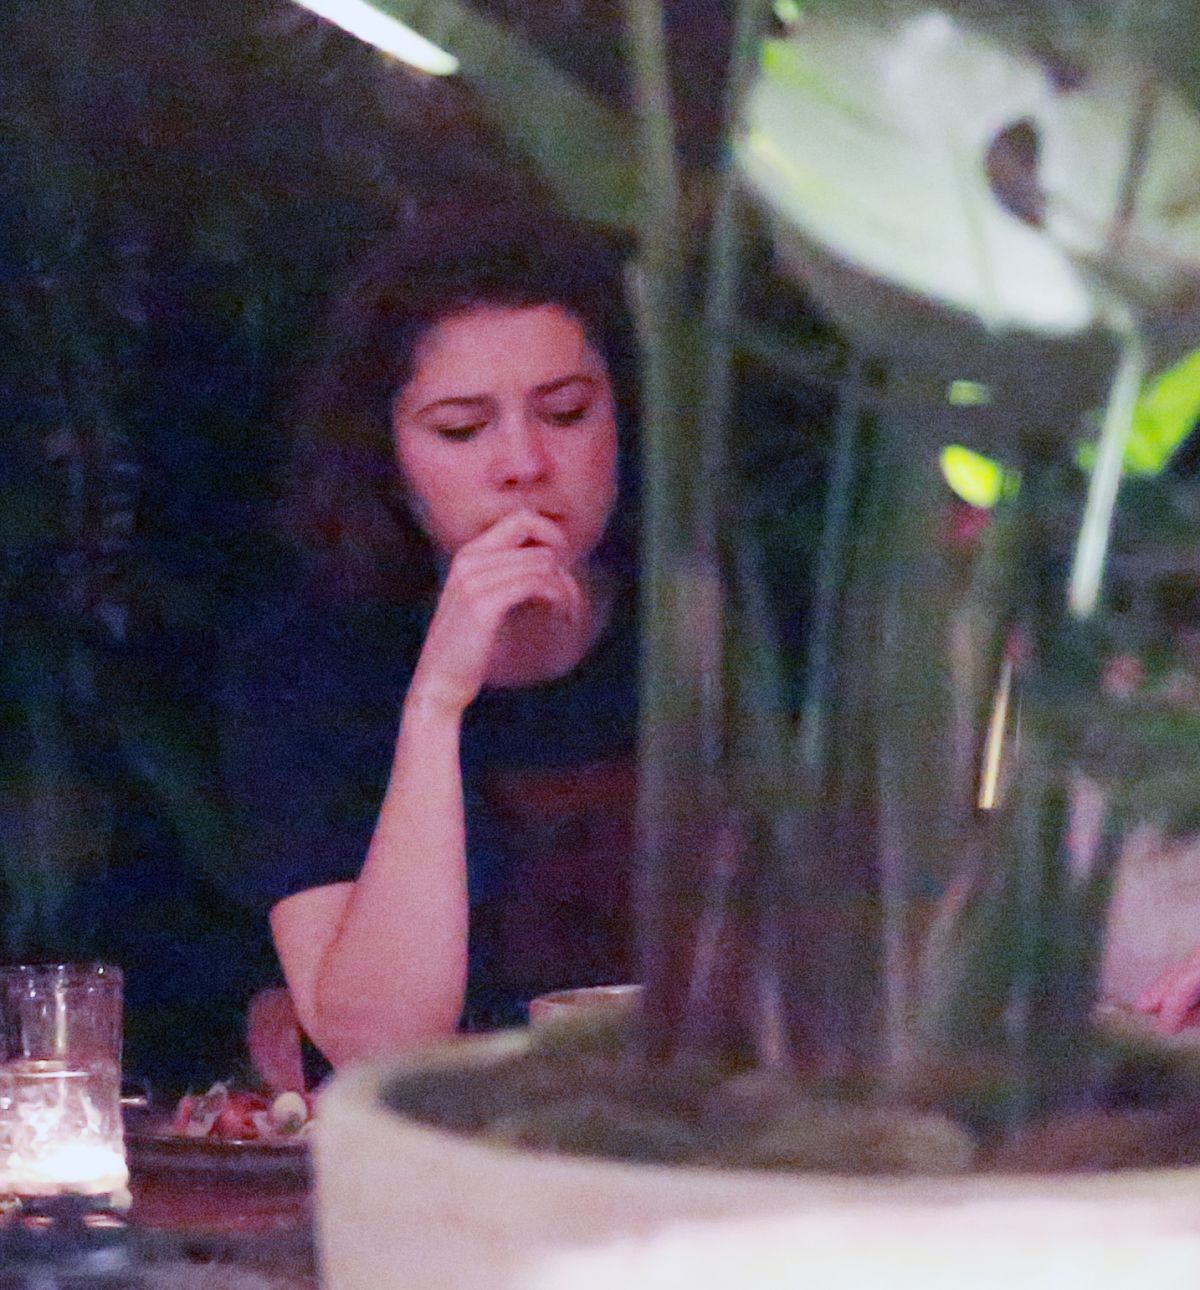 mary-elizabeth-winstead-out-for-dinner-at-palihouse-in-los-angeles-november-21-2017-3.jpg